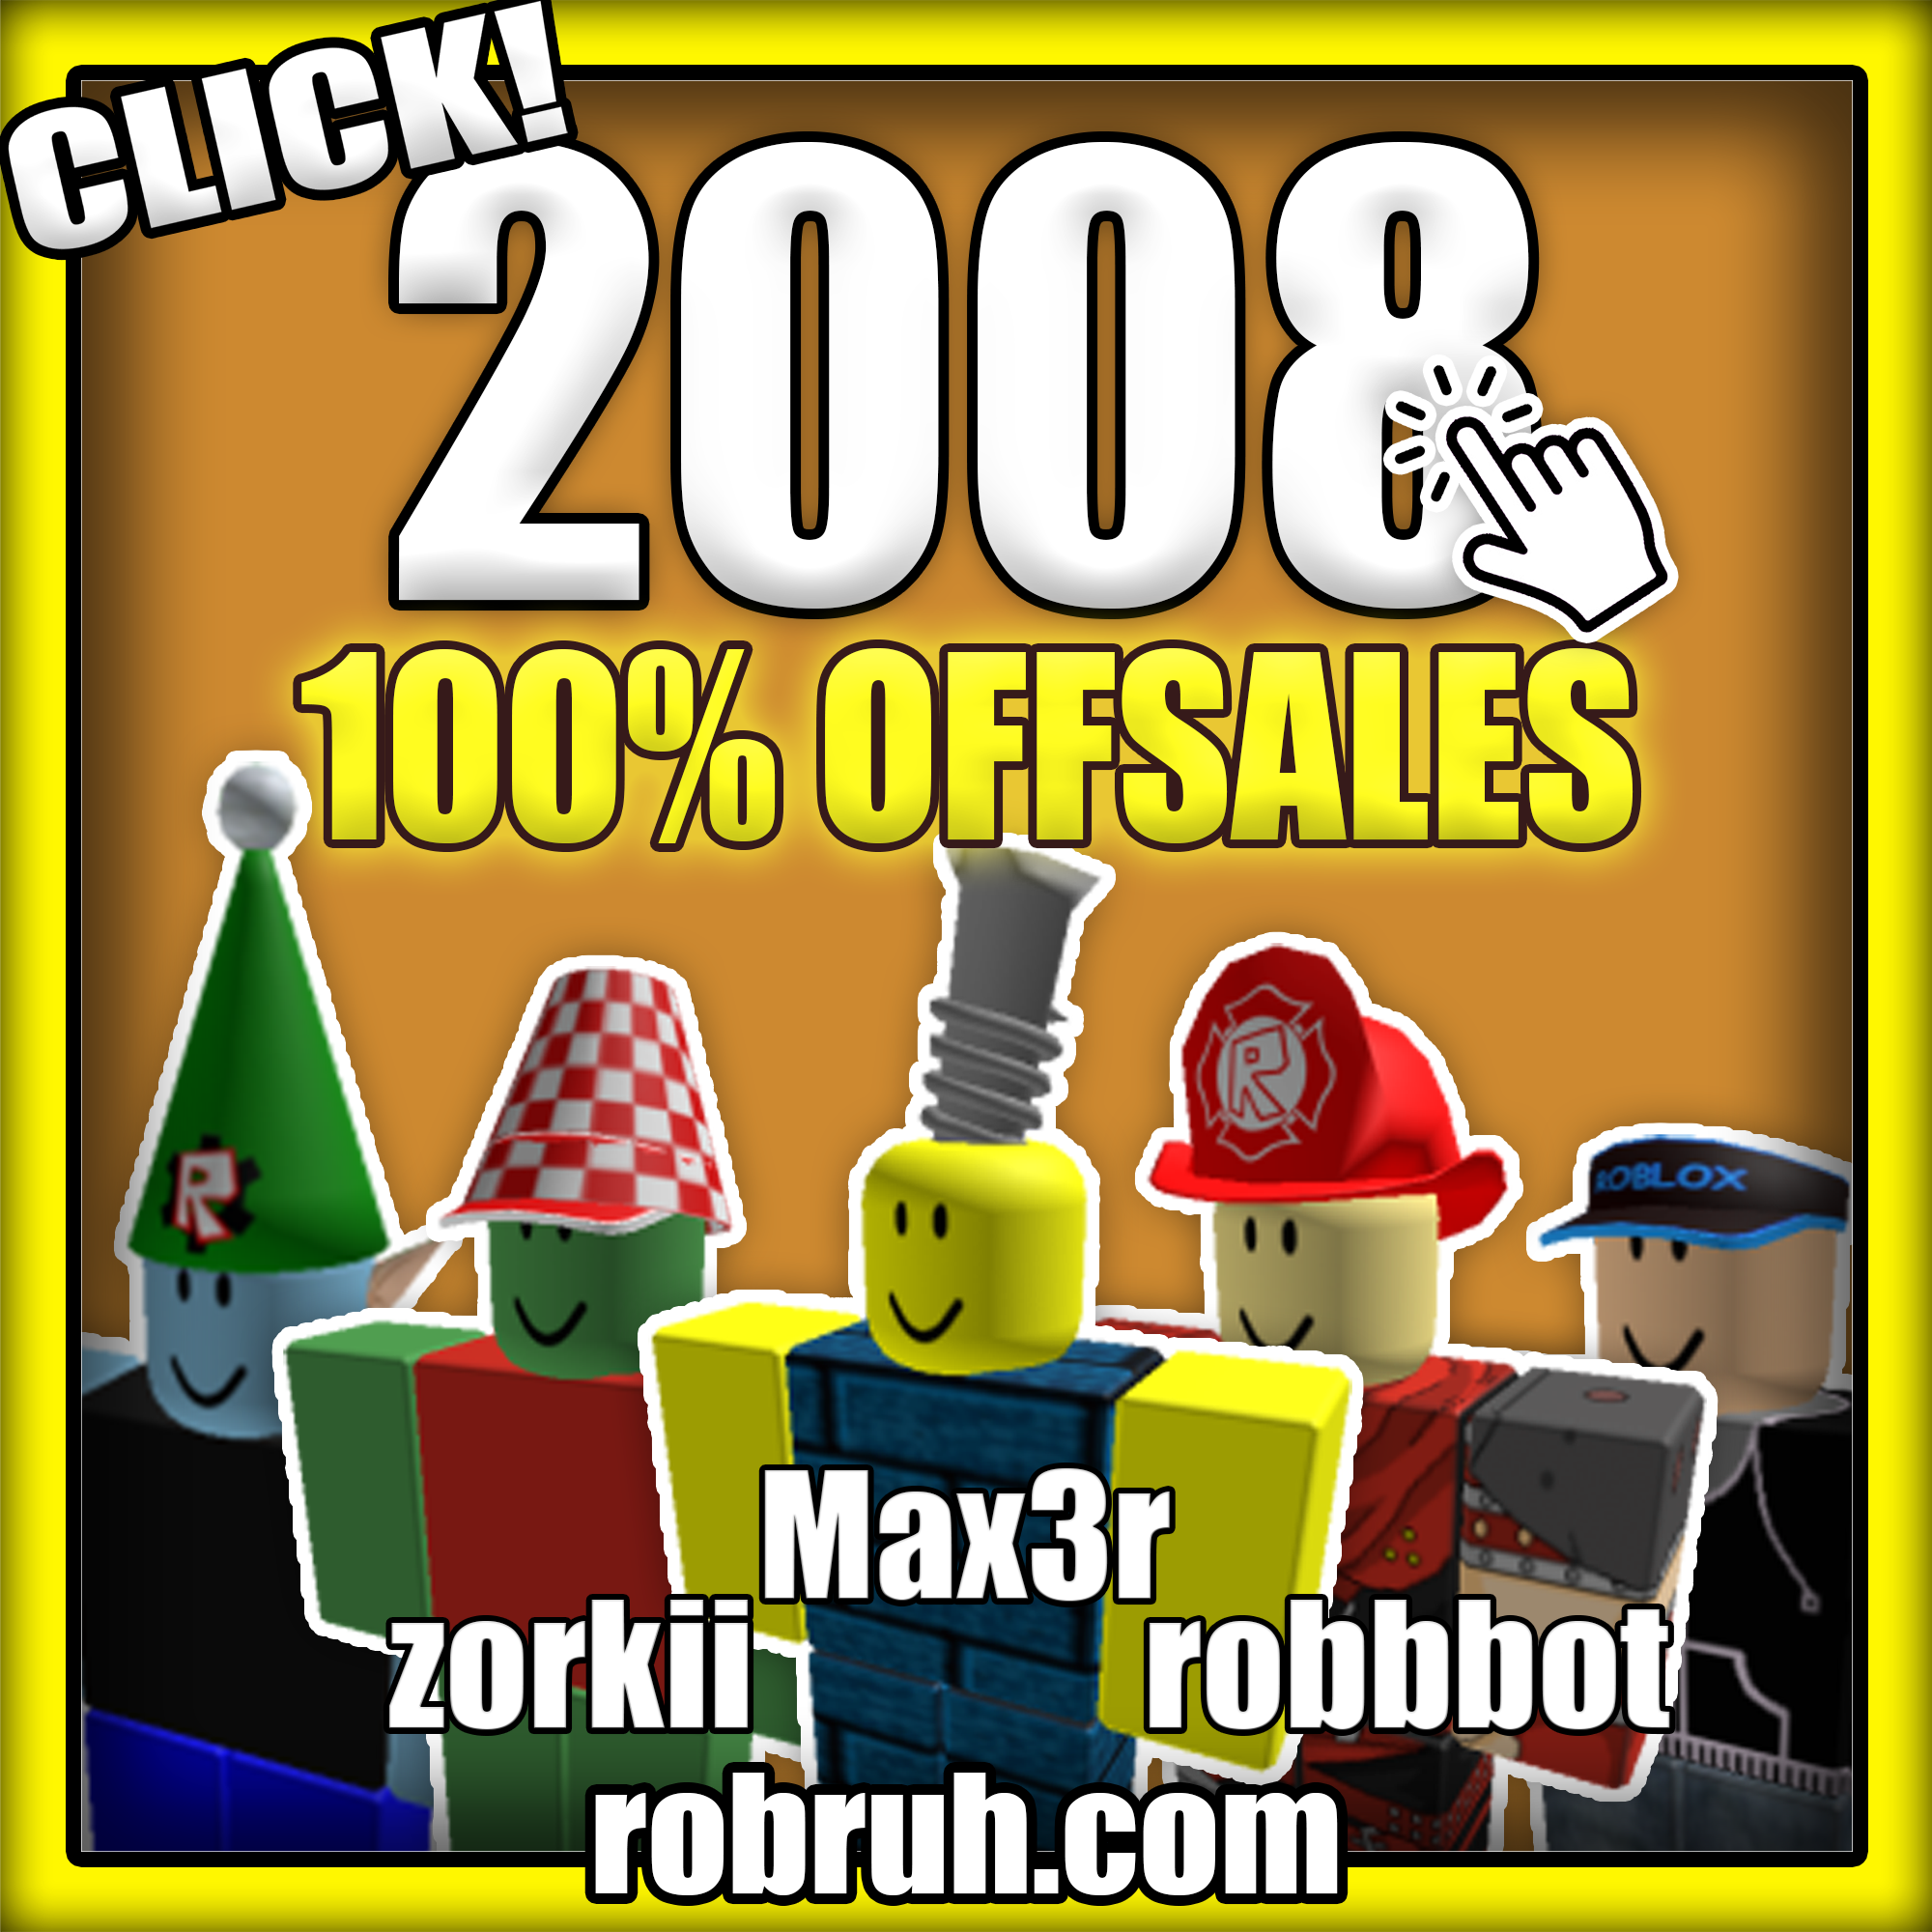 robruh 2008 ROBLOX account with at least one guaranteed offsale item